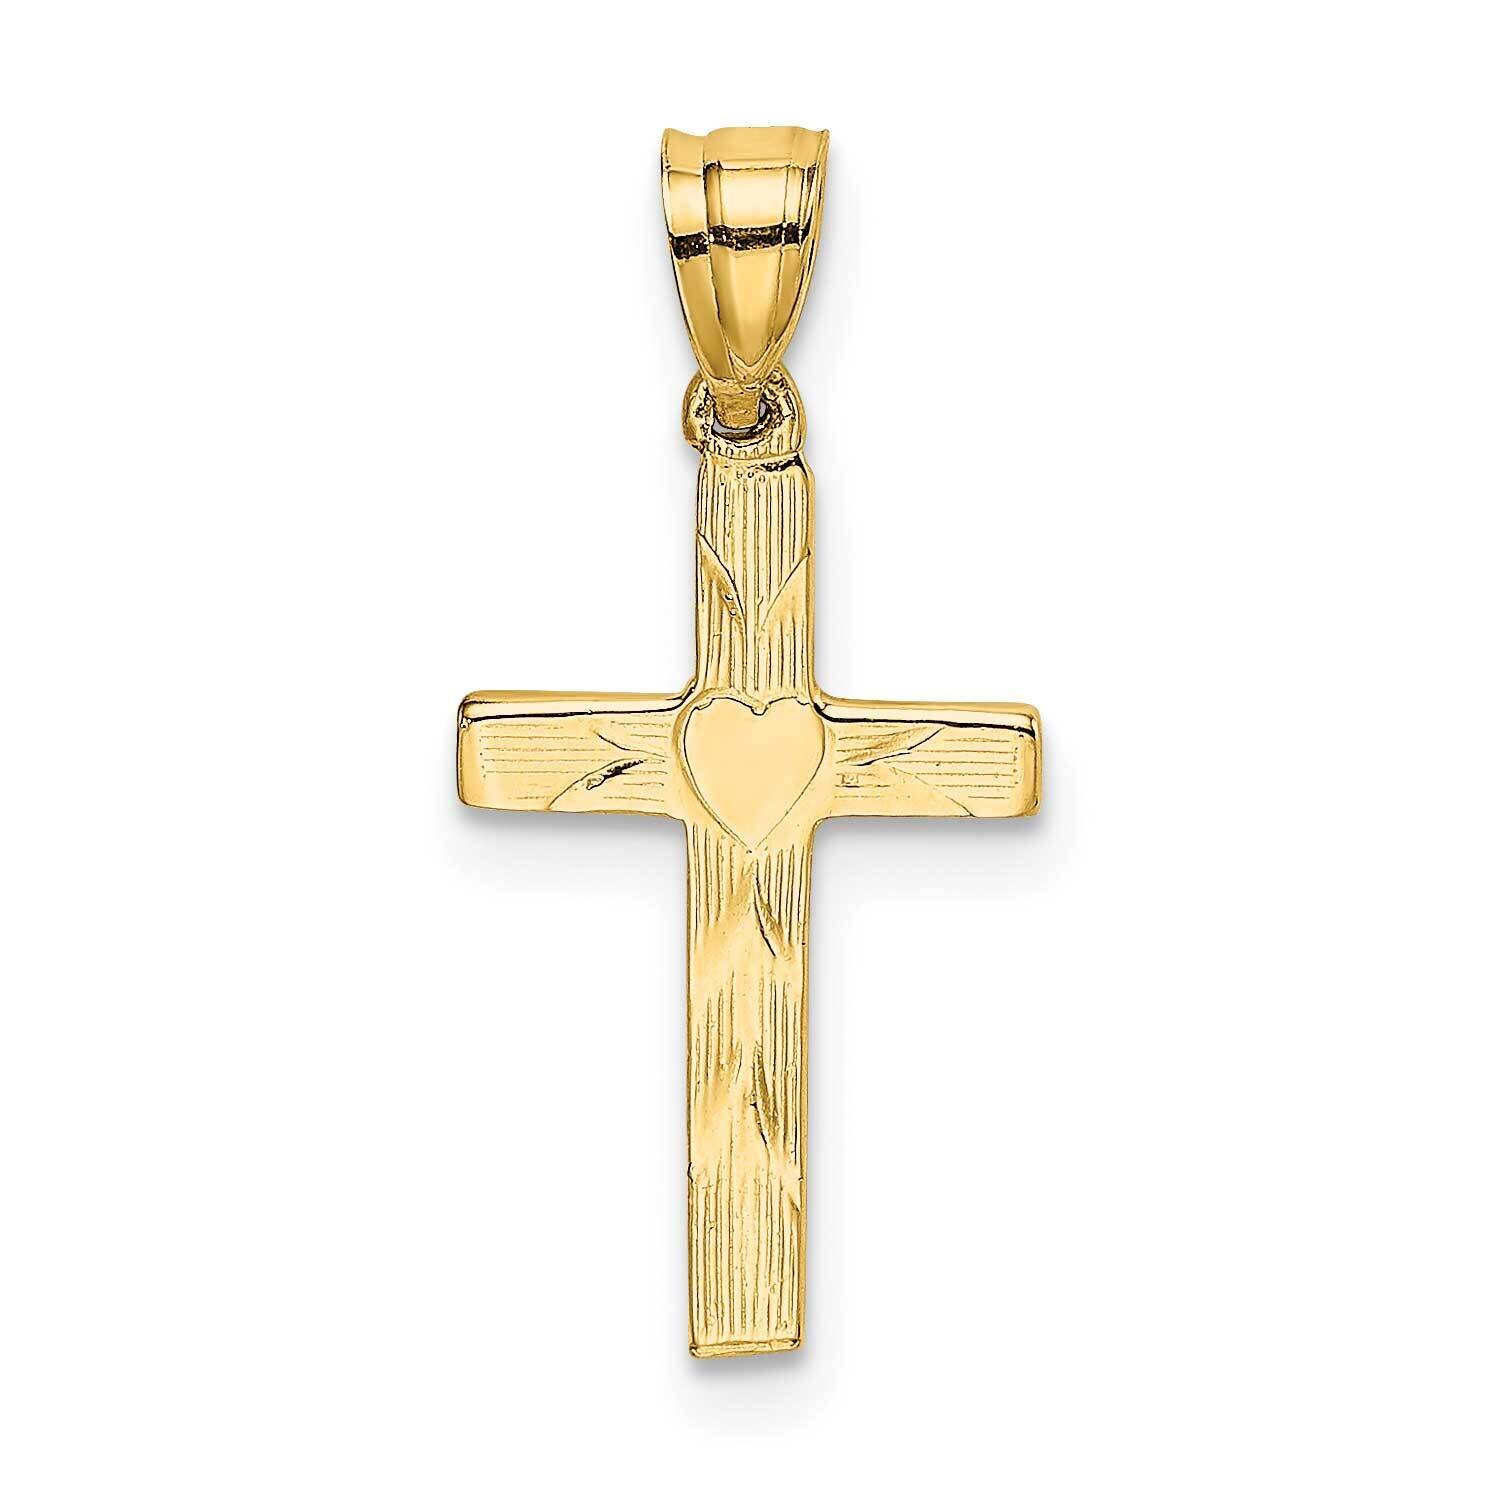 Cross with Heart Center Charm 14k Gold Polished &amp; Engraved K8374